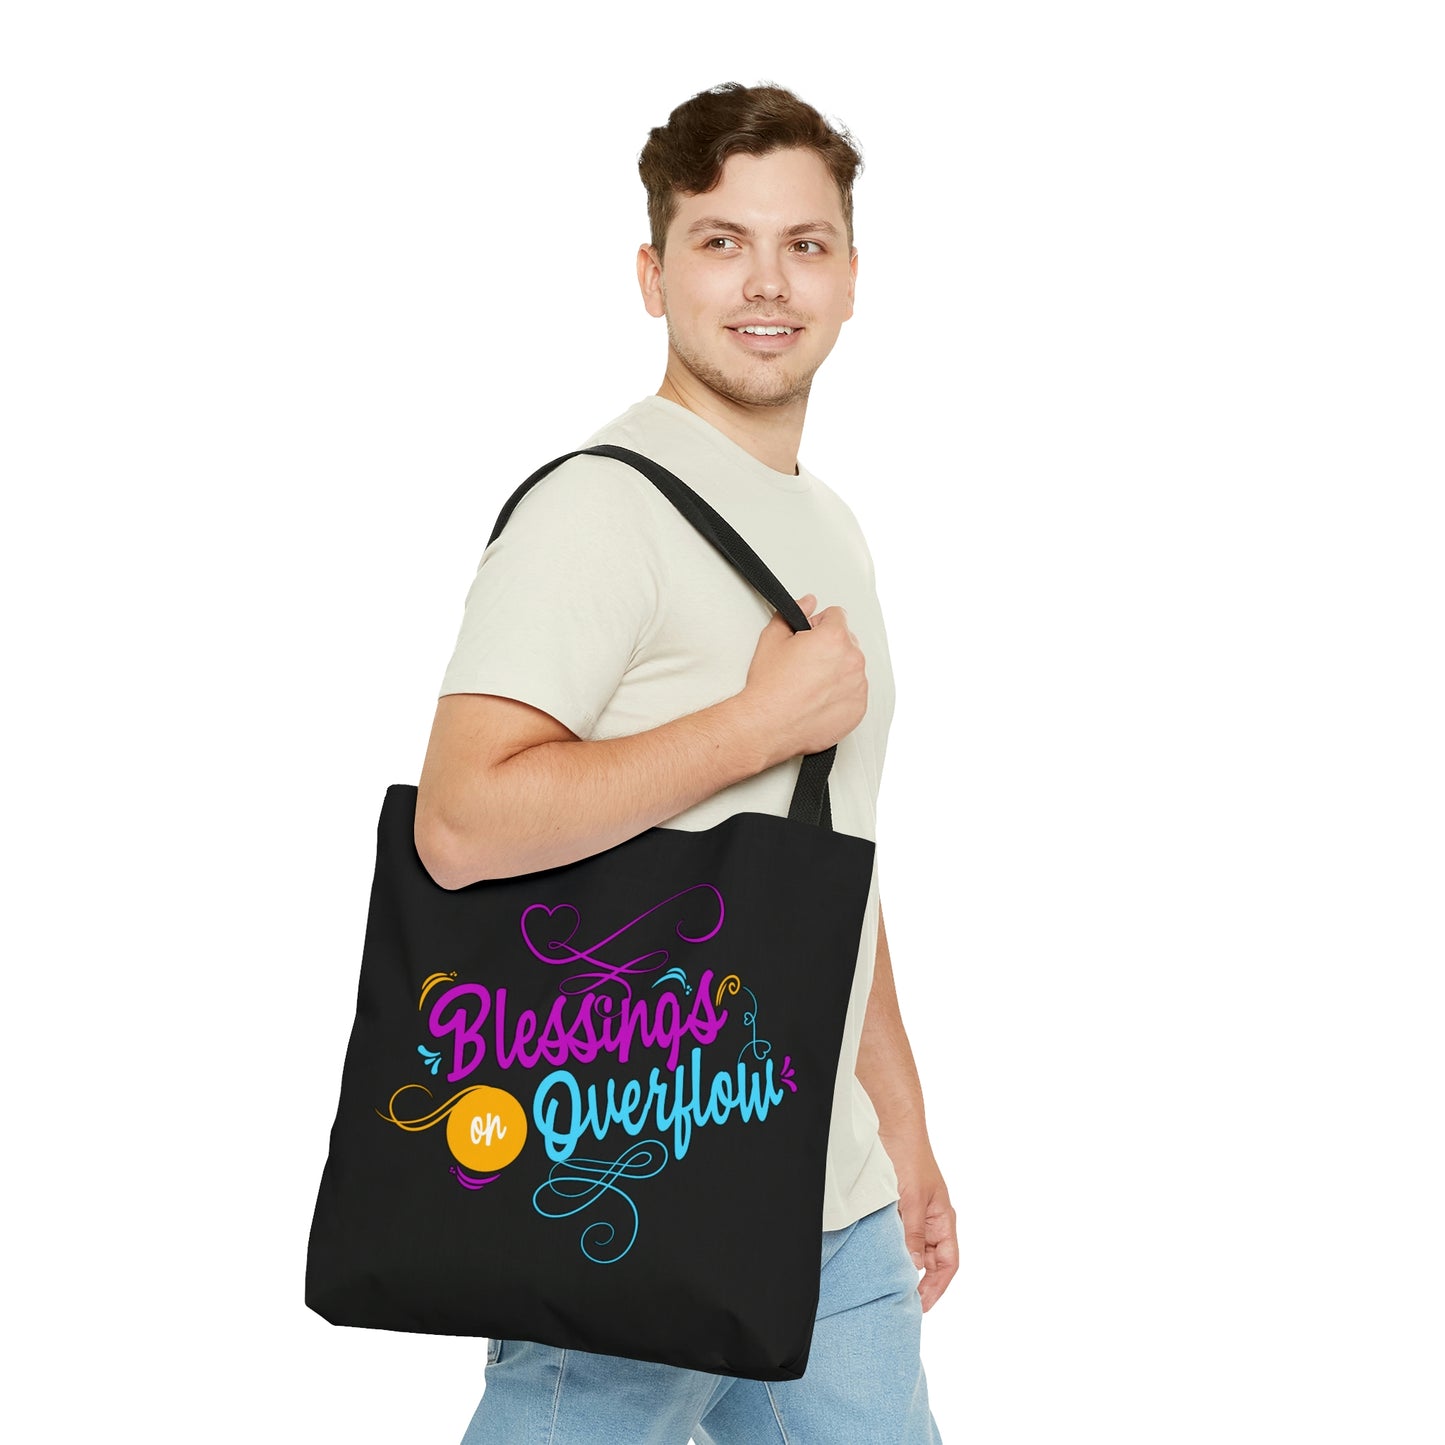 Blessings on Overflow Tote Bag